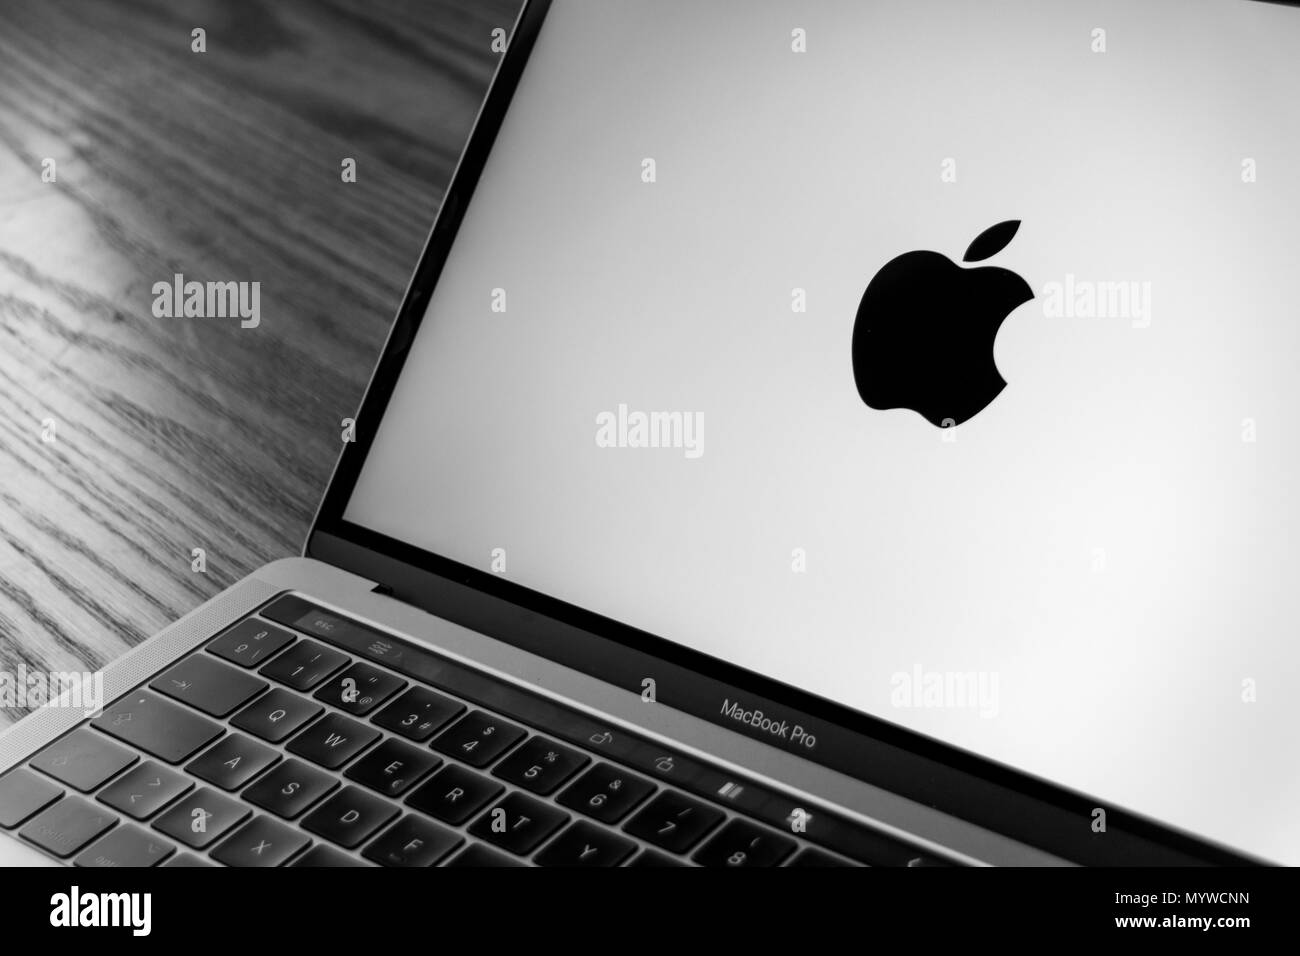 Dallas, Texas/ United States - 06/7/2018: (Photograph of the Apple logo on computer screen) Stock Photo